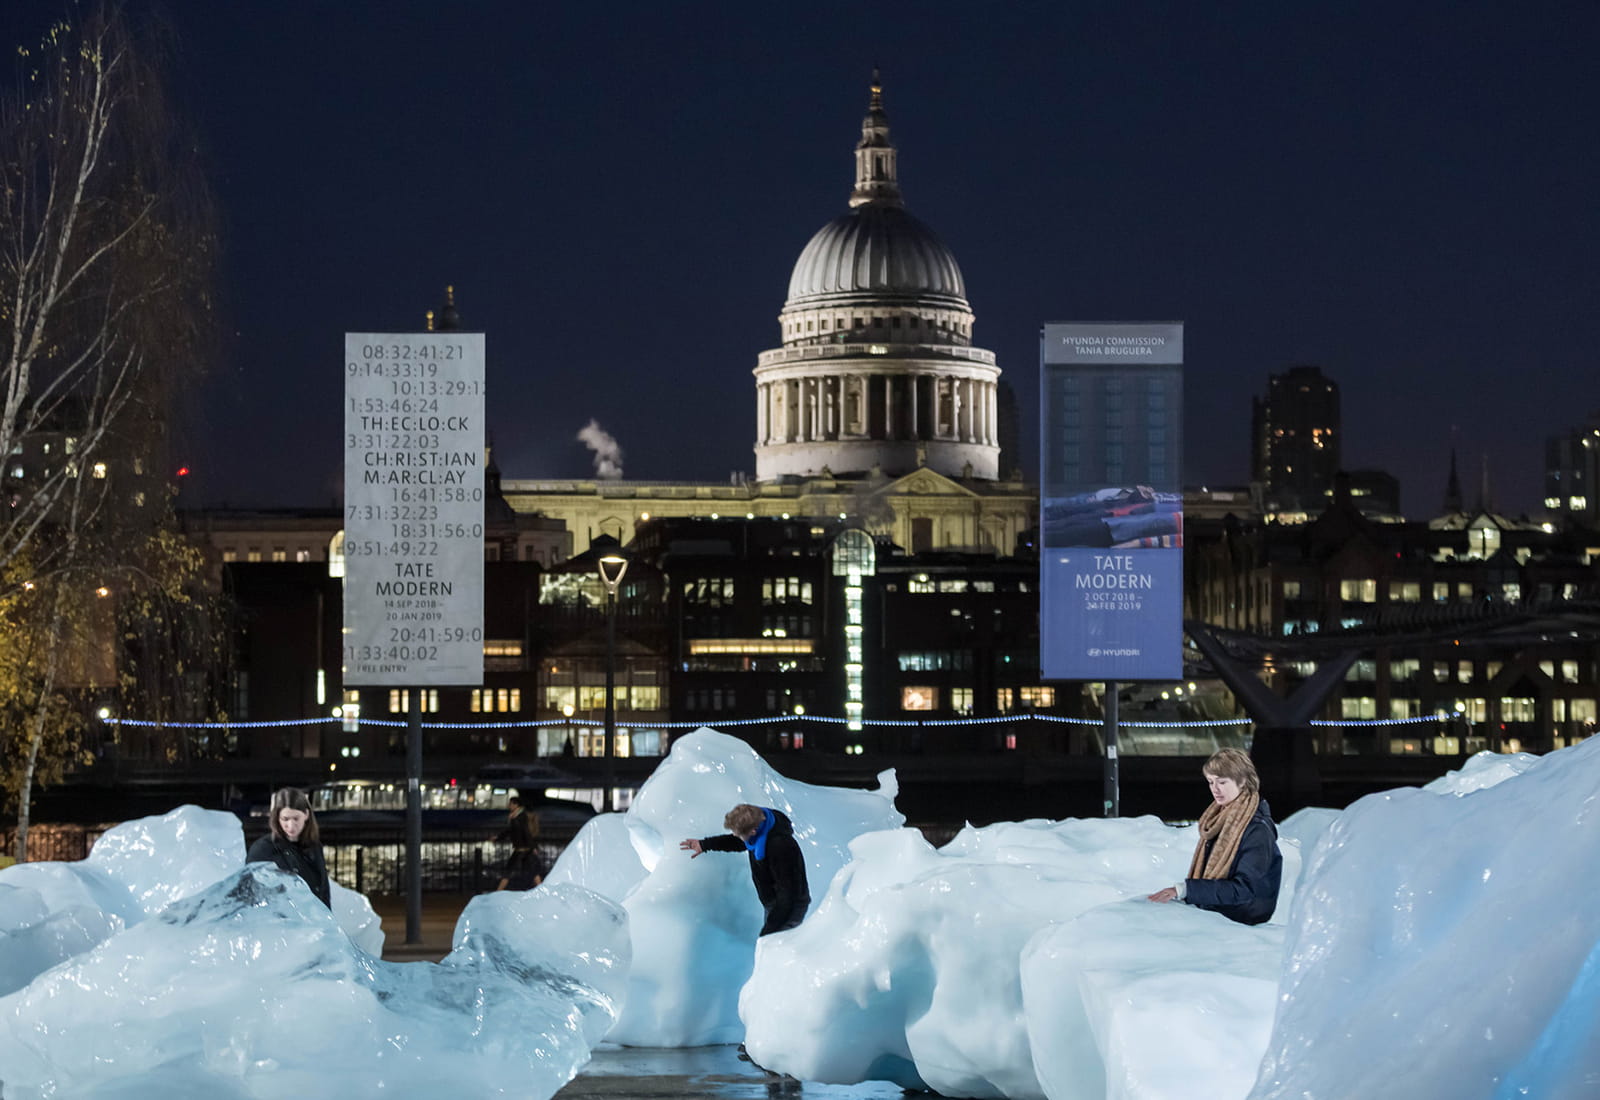 A public art installation, "Ice Watch," by artist Olafur Eliasson, sits in front of London's Tate Modern as a reminder of the urgency of taking action on climate change.